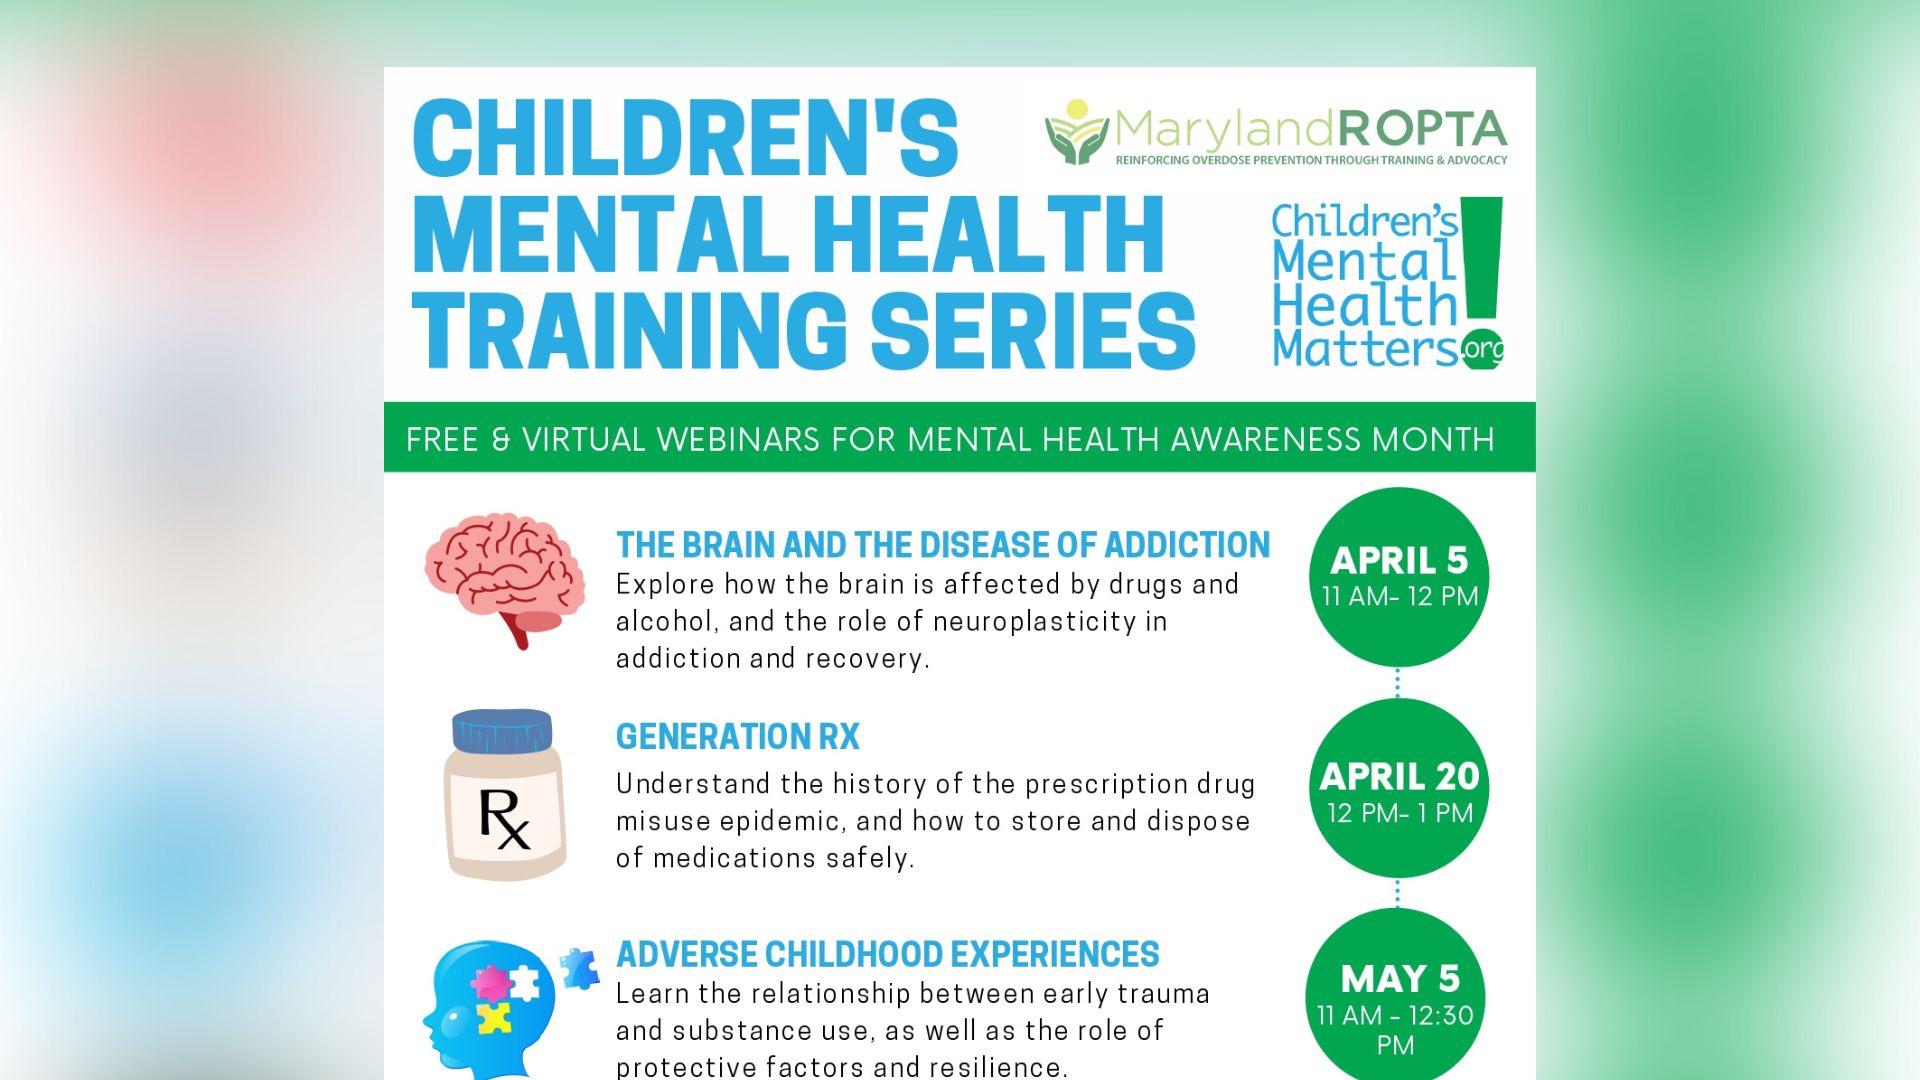 New MCFD SAJE Mental Health and Counselling Benefit & Life-skills, Training  and Cultural Connections Funding 